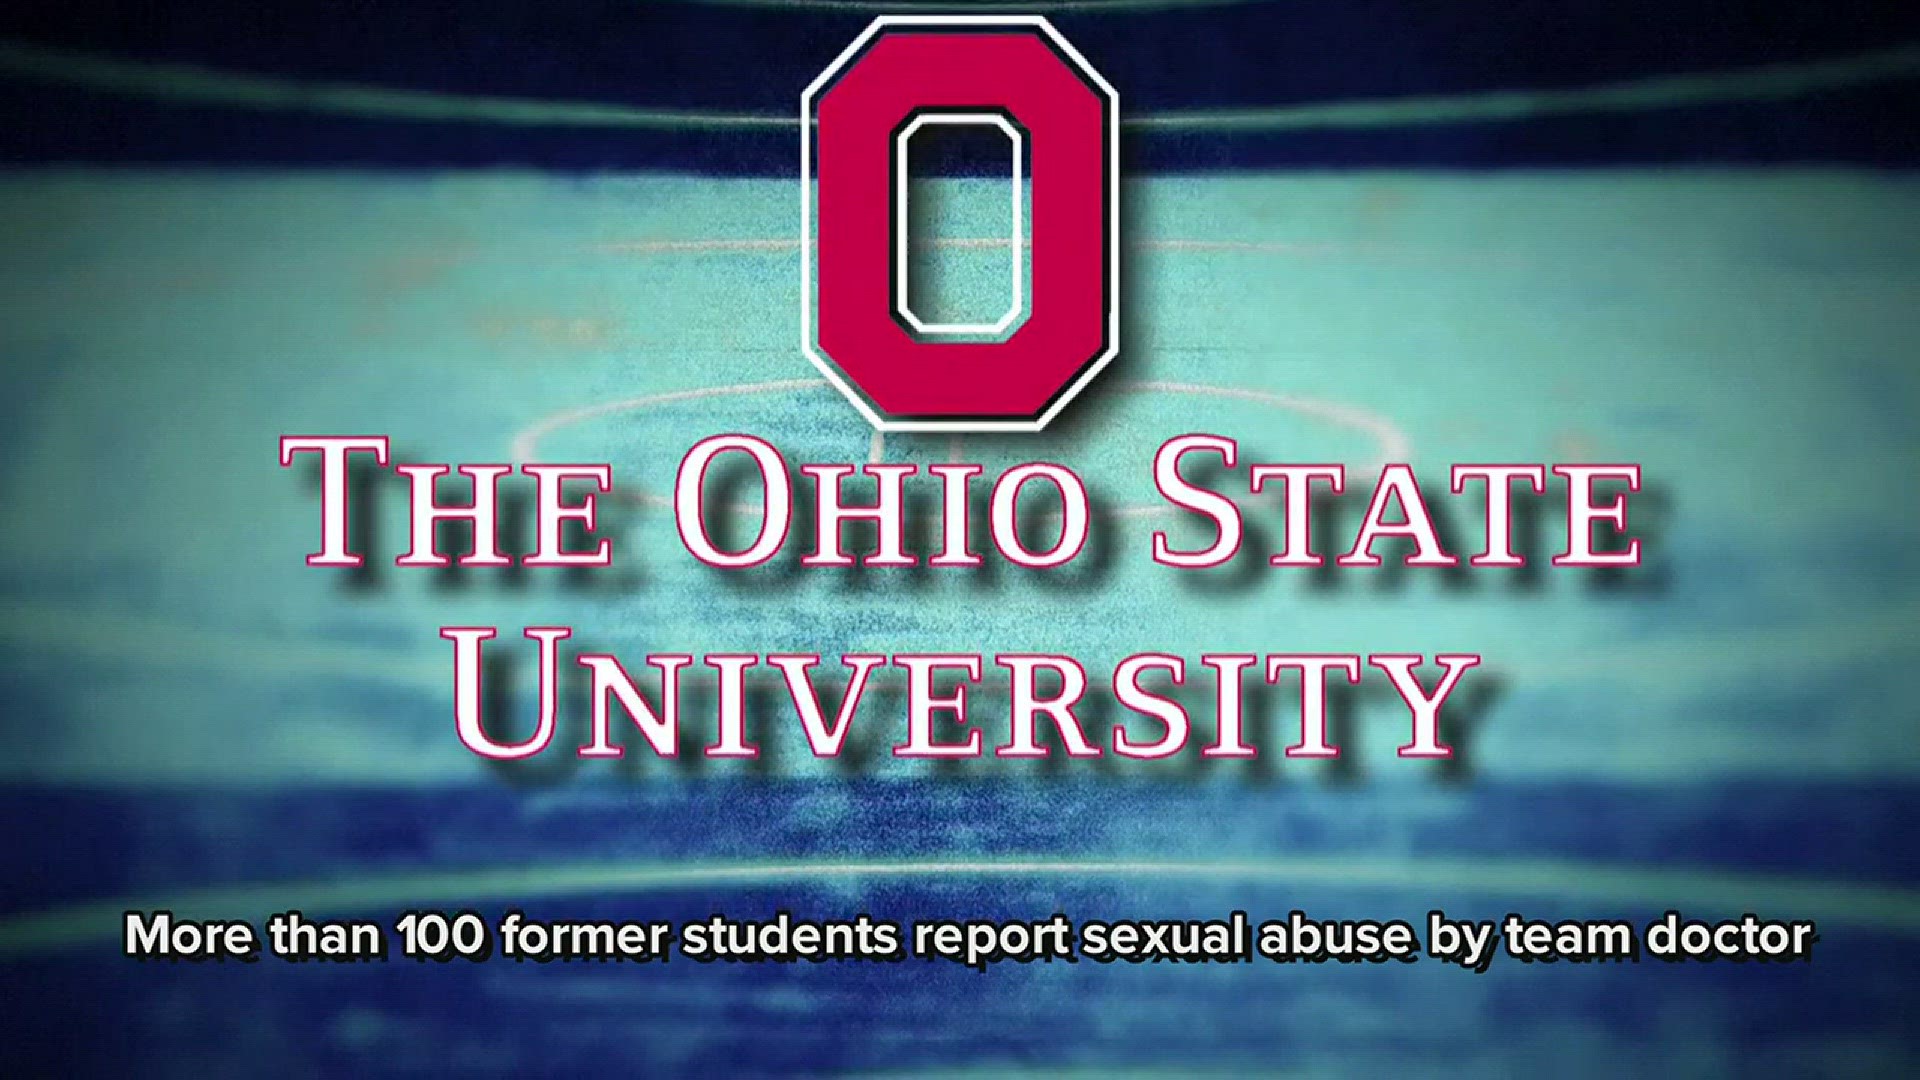 More than 100 former students report sexual abuse by team doctor